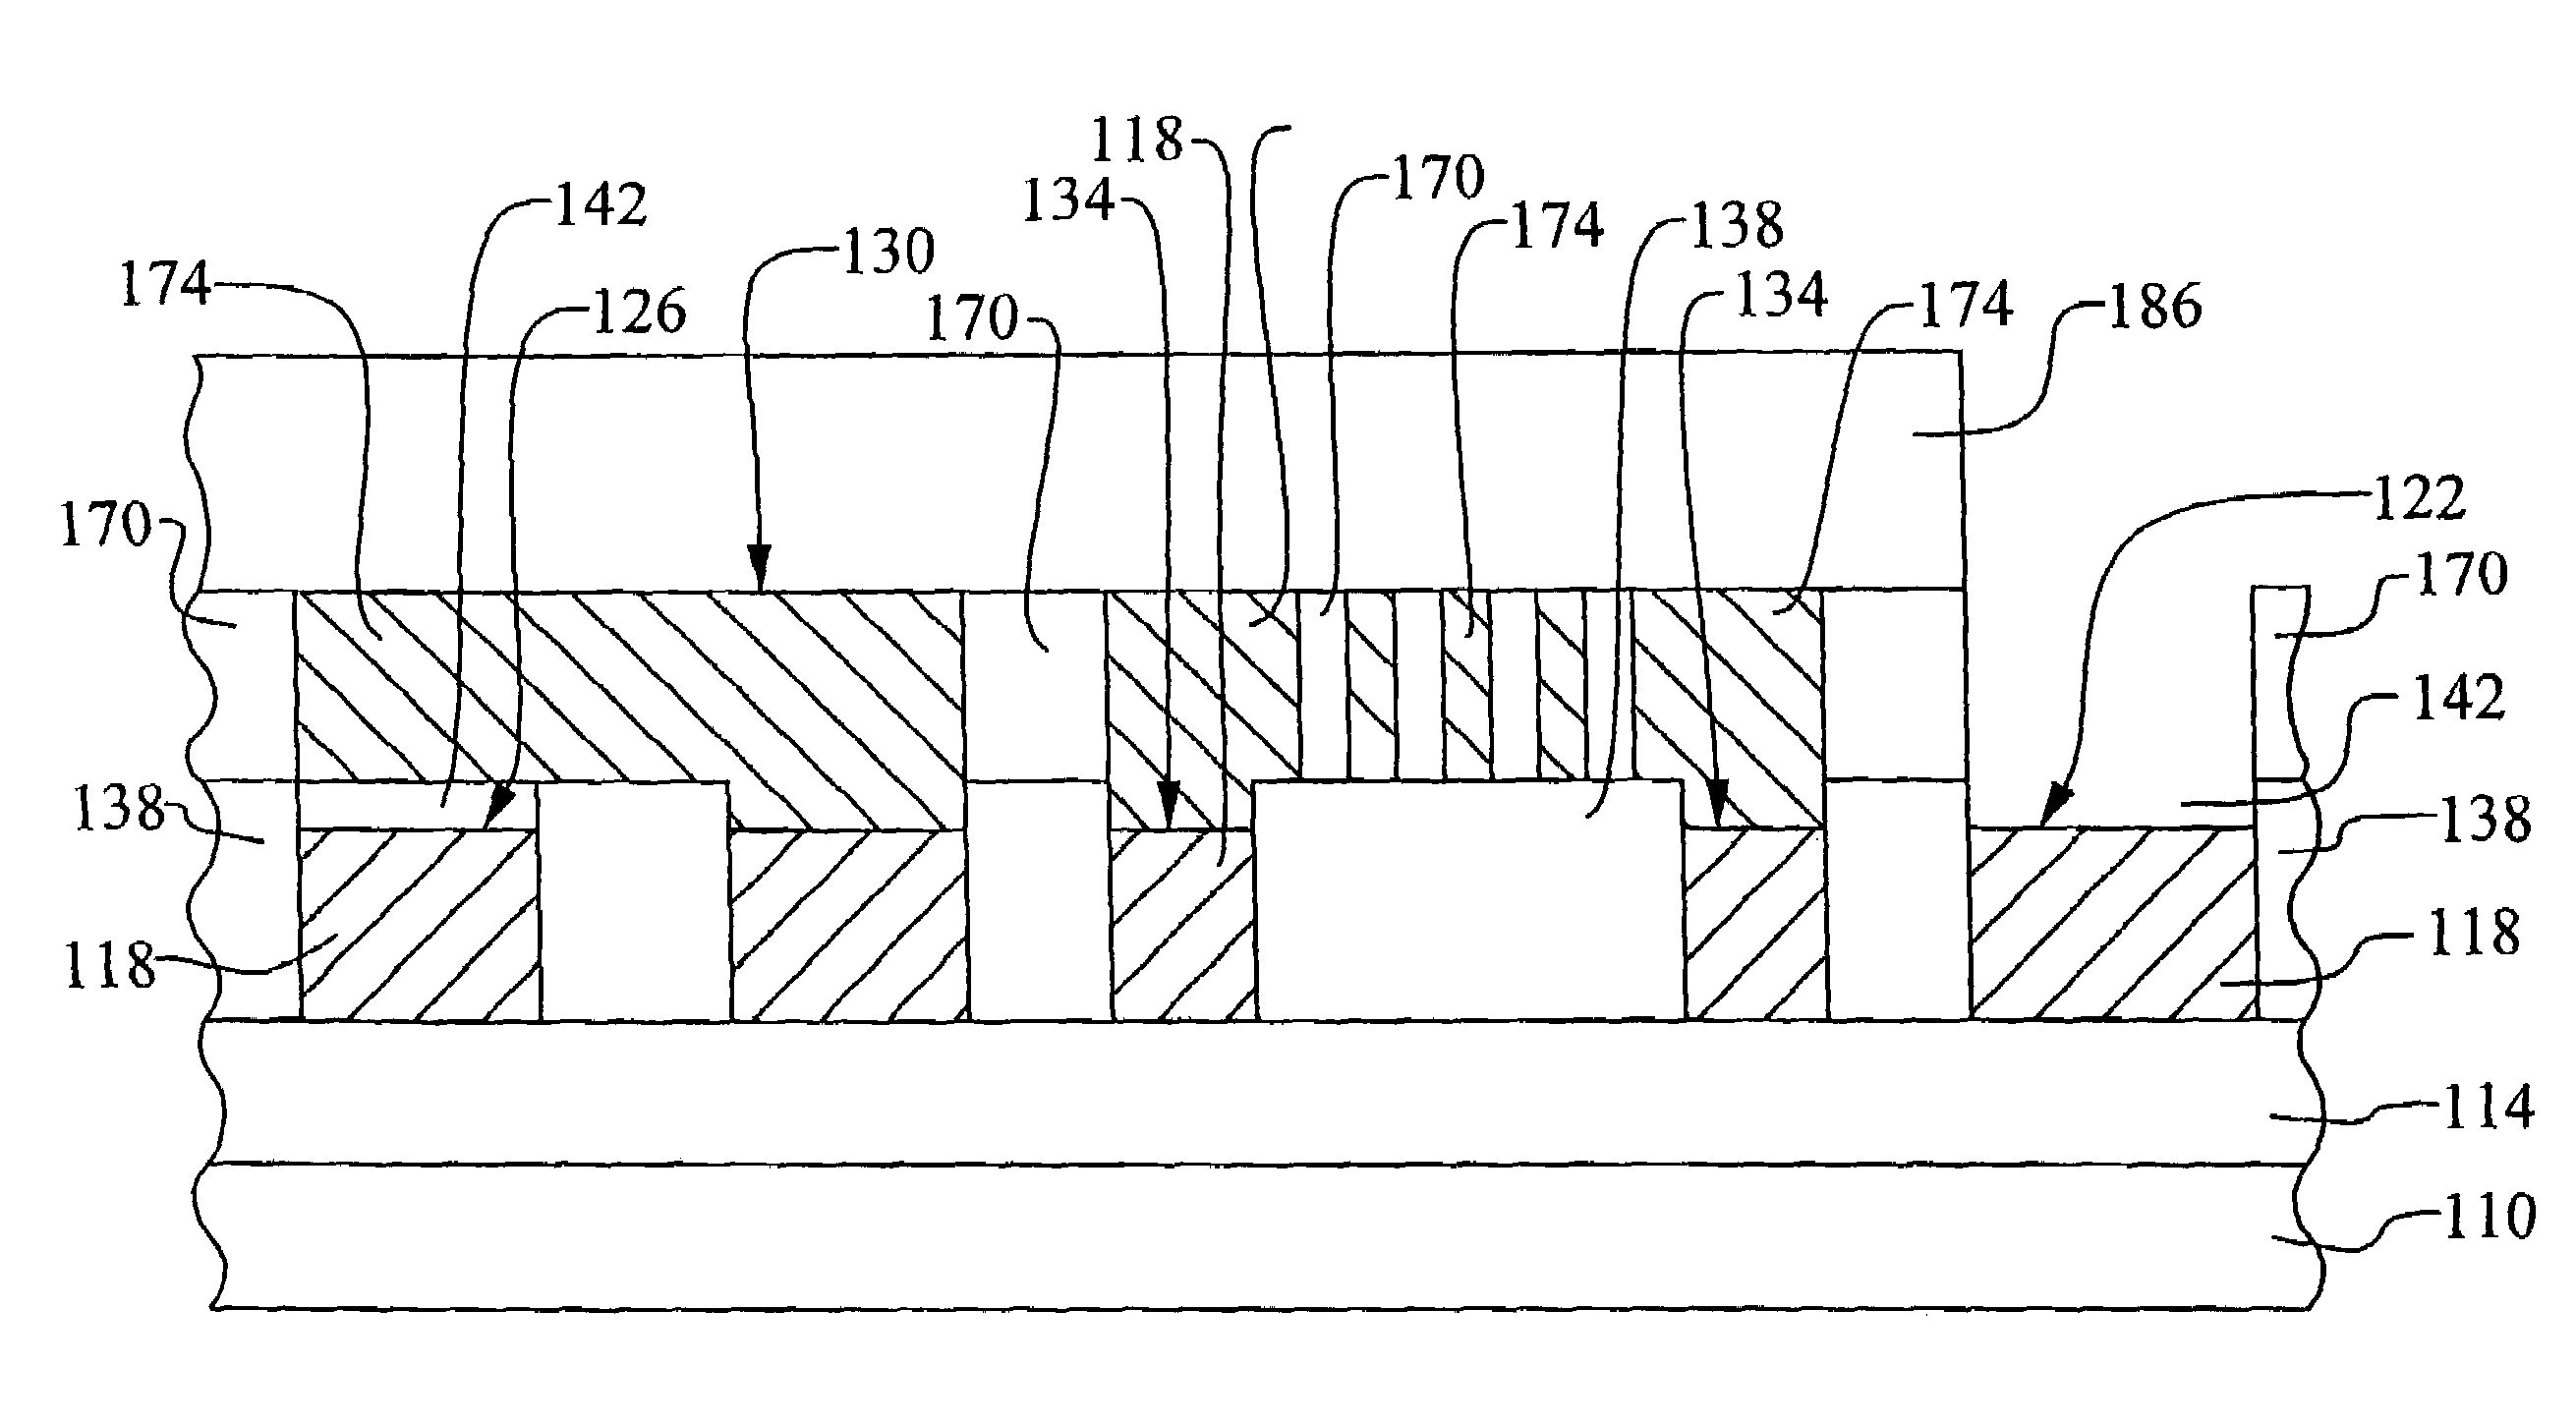 Capacitor and inductor scheme with e-fuse application